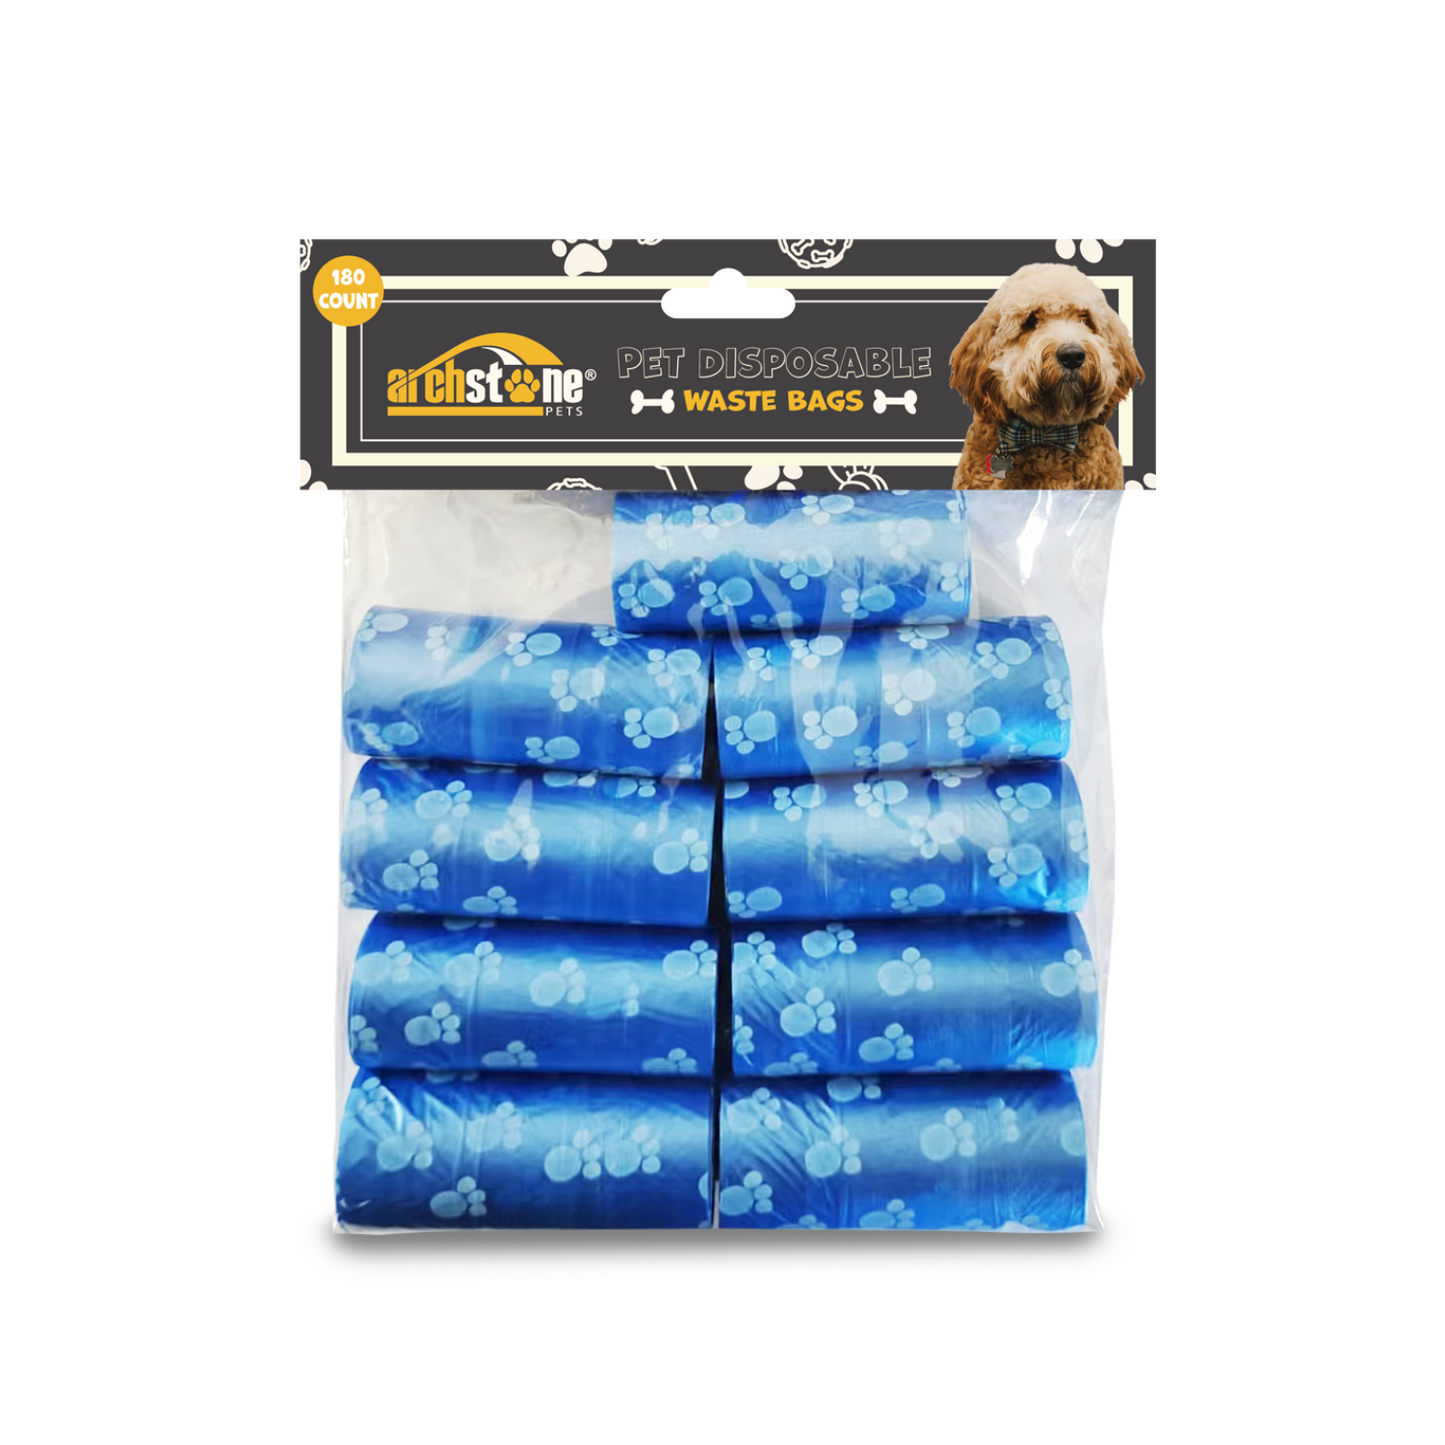 Pet Disposable Waste Bags (180 Count)